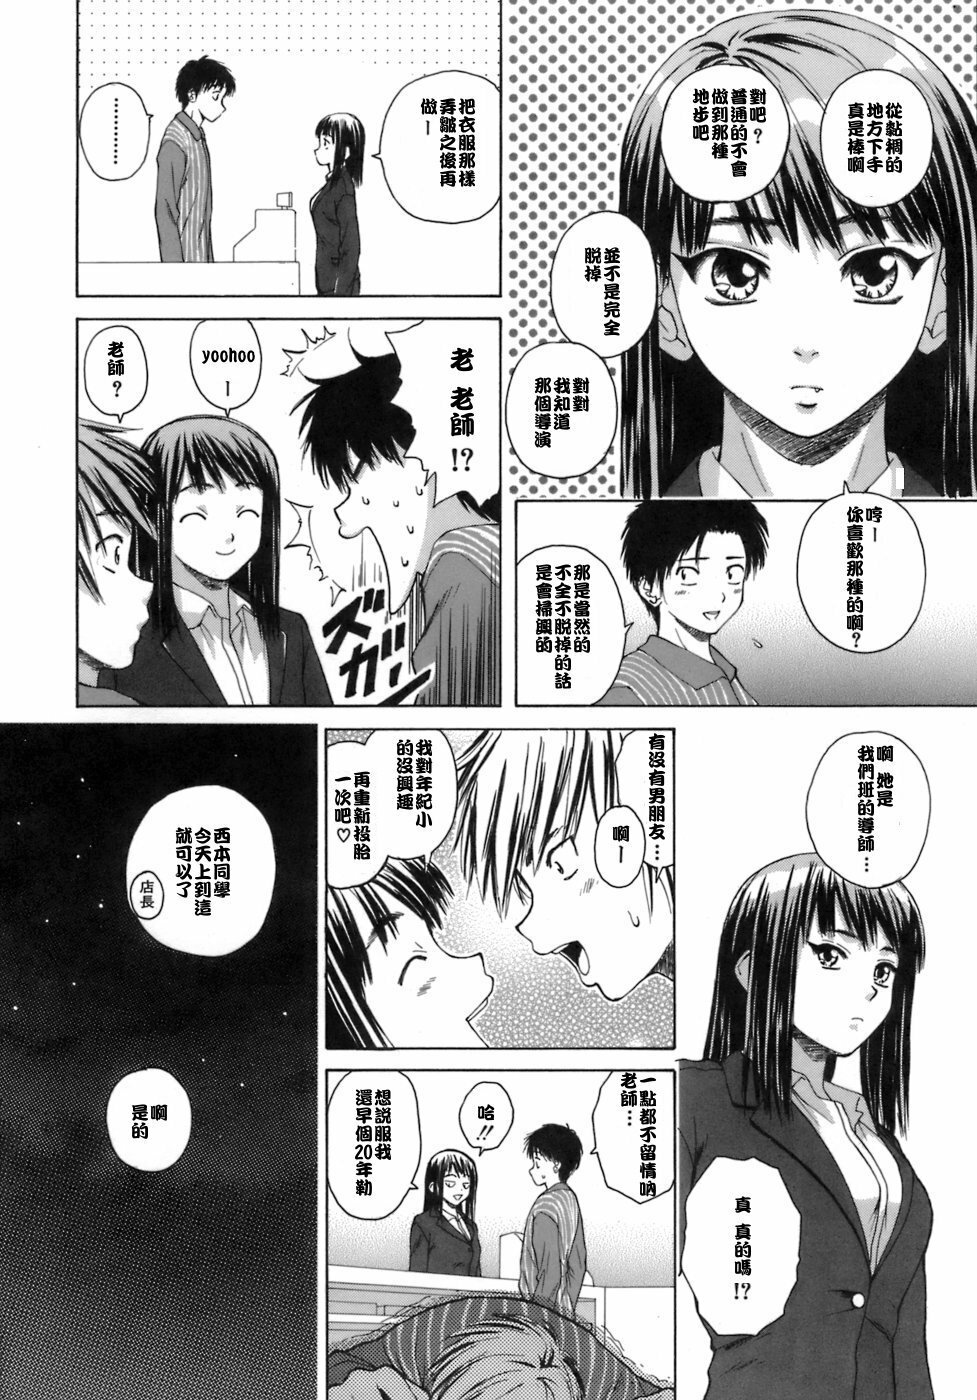 [Fuuga] Kyoushi to Seito to - Teacher and Student [Chinese] [悠月工房] page 9 full